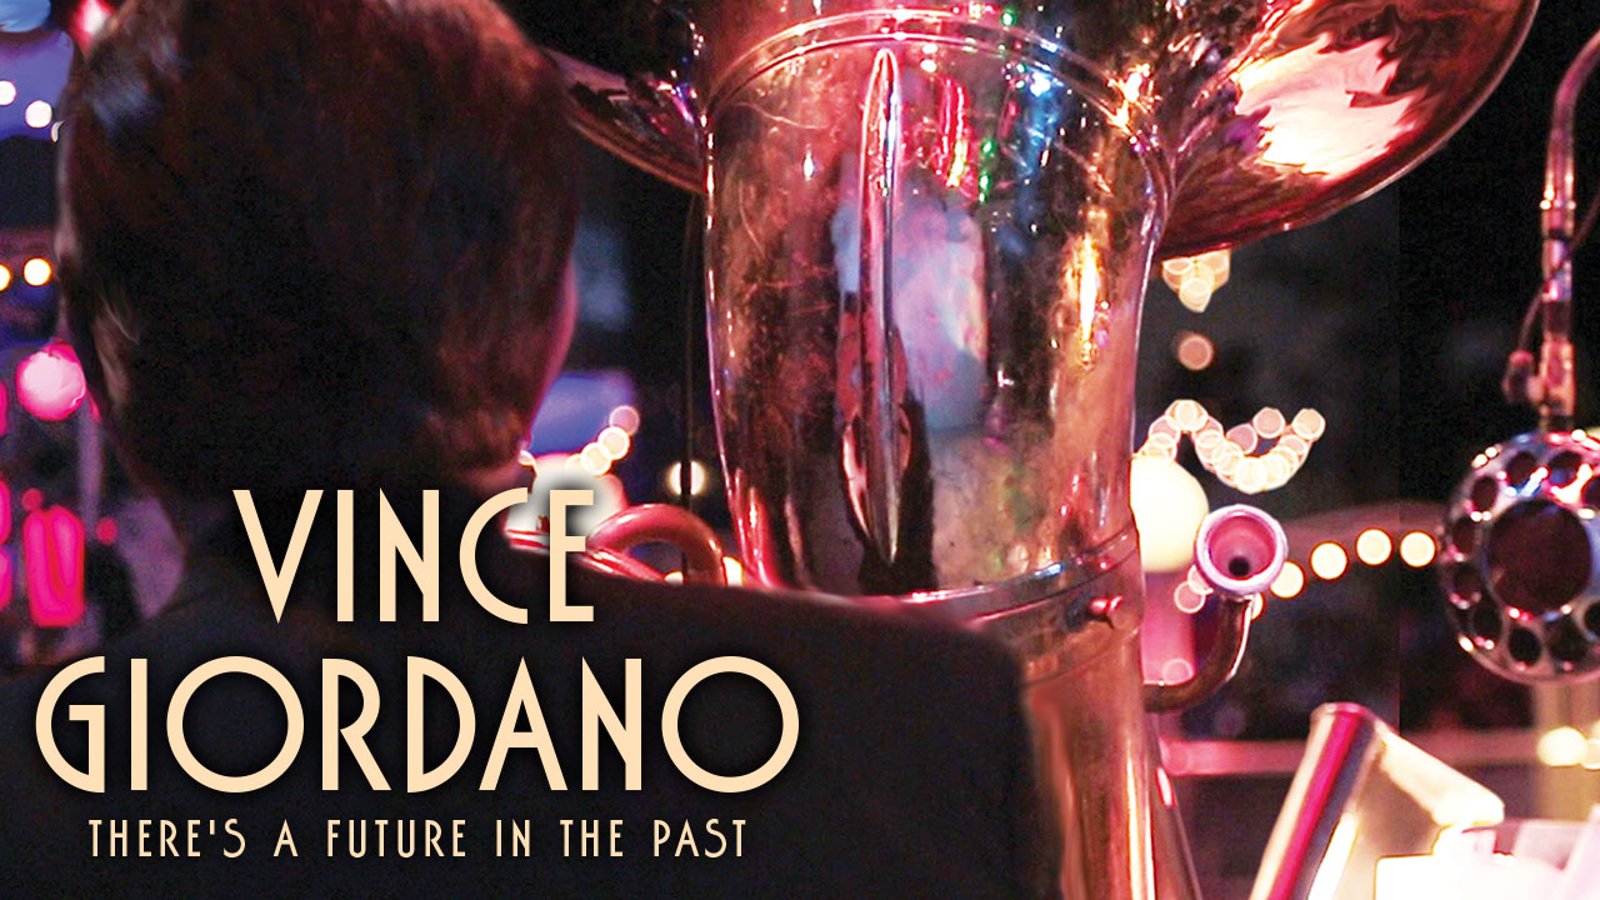 Vince Giordano: There's a Future in the Past - Portrait of a Jazz Artist